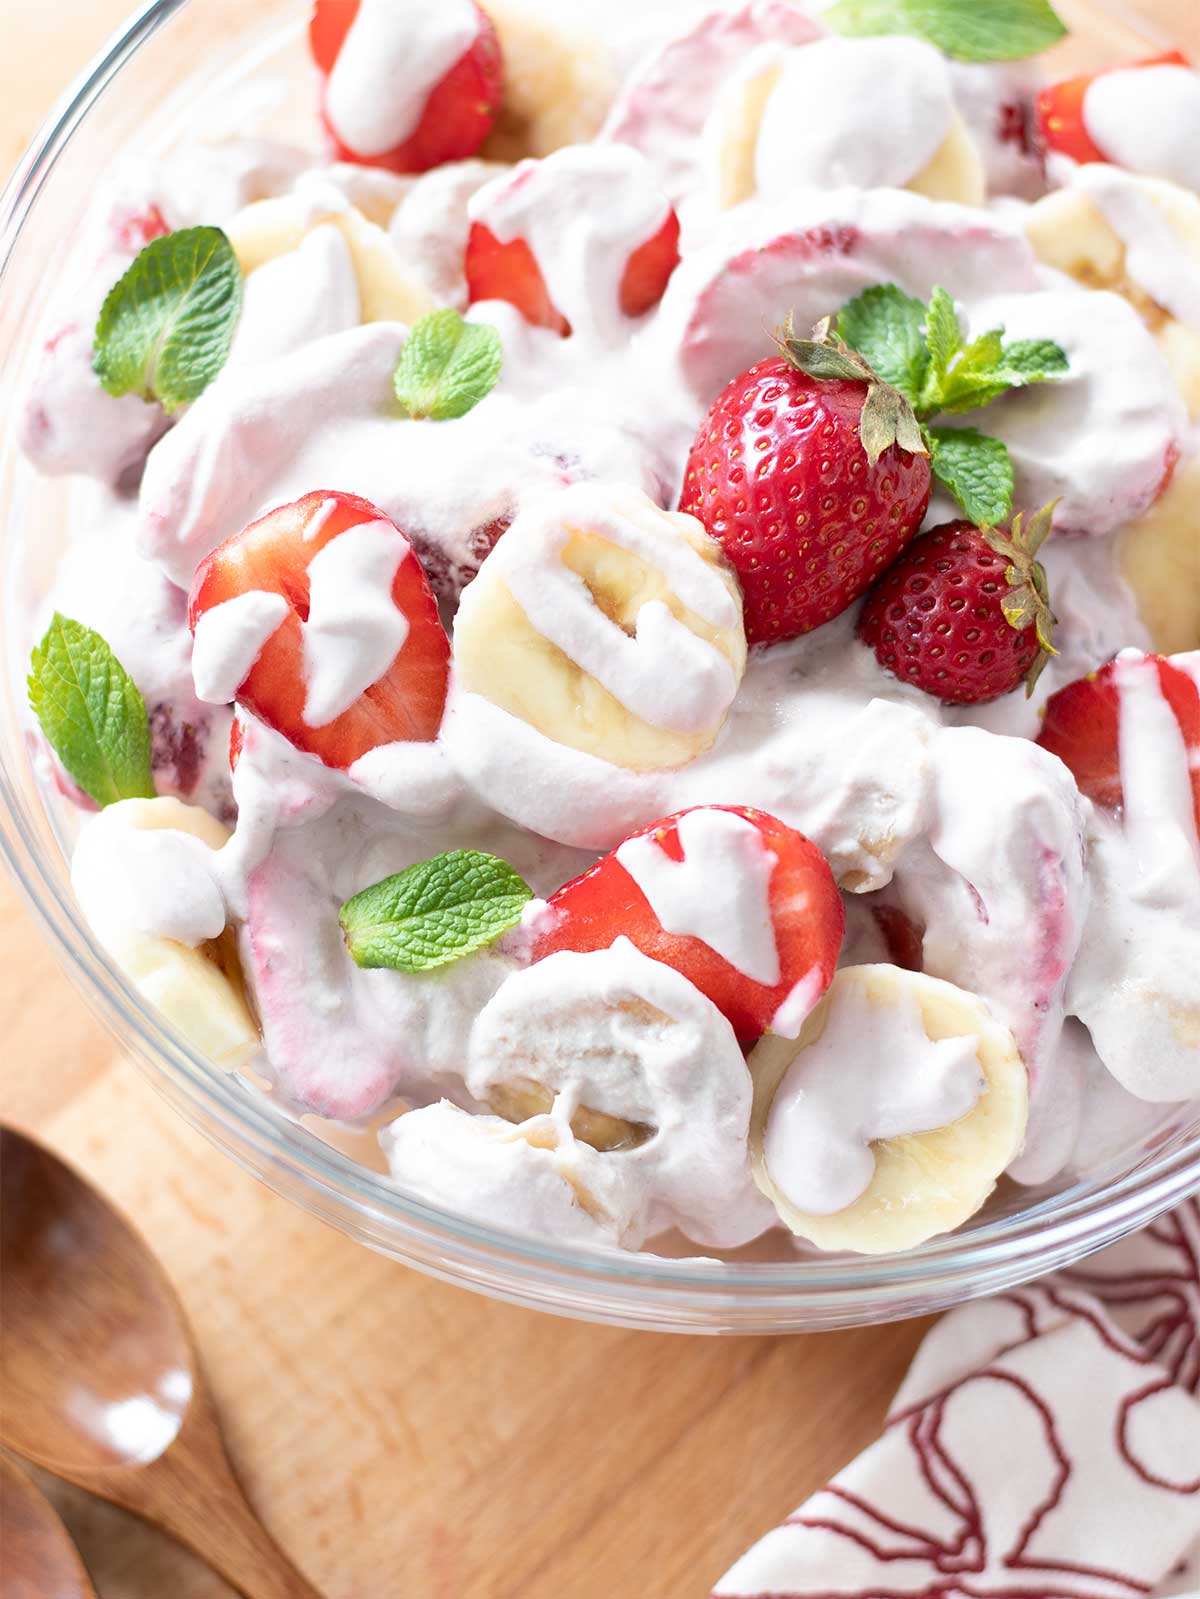 Delicious summer dessert salad with creamy cashew strawberry dressing decorated with fresh mint leaves on table with wooden spoon and kitchen towel